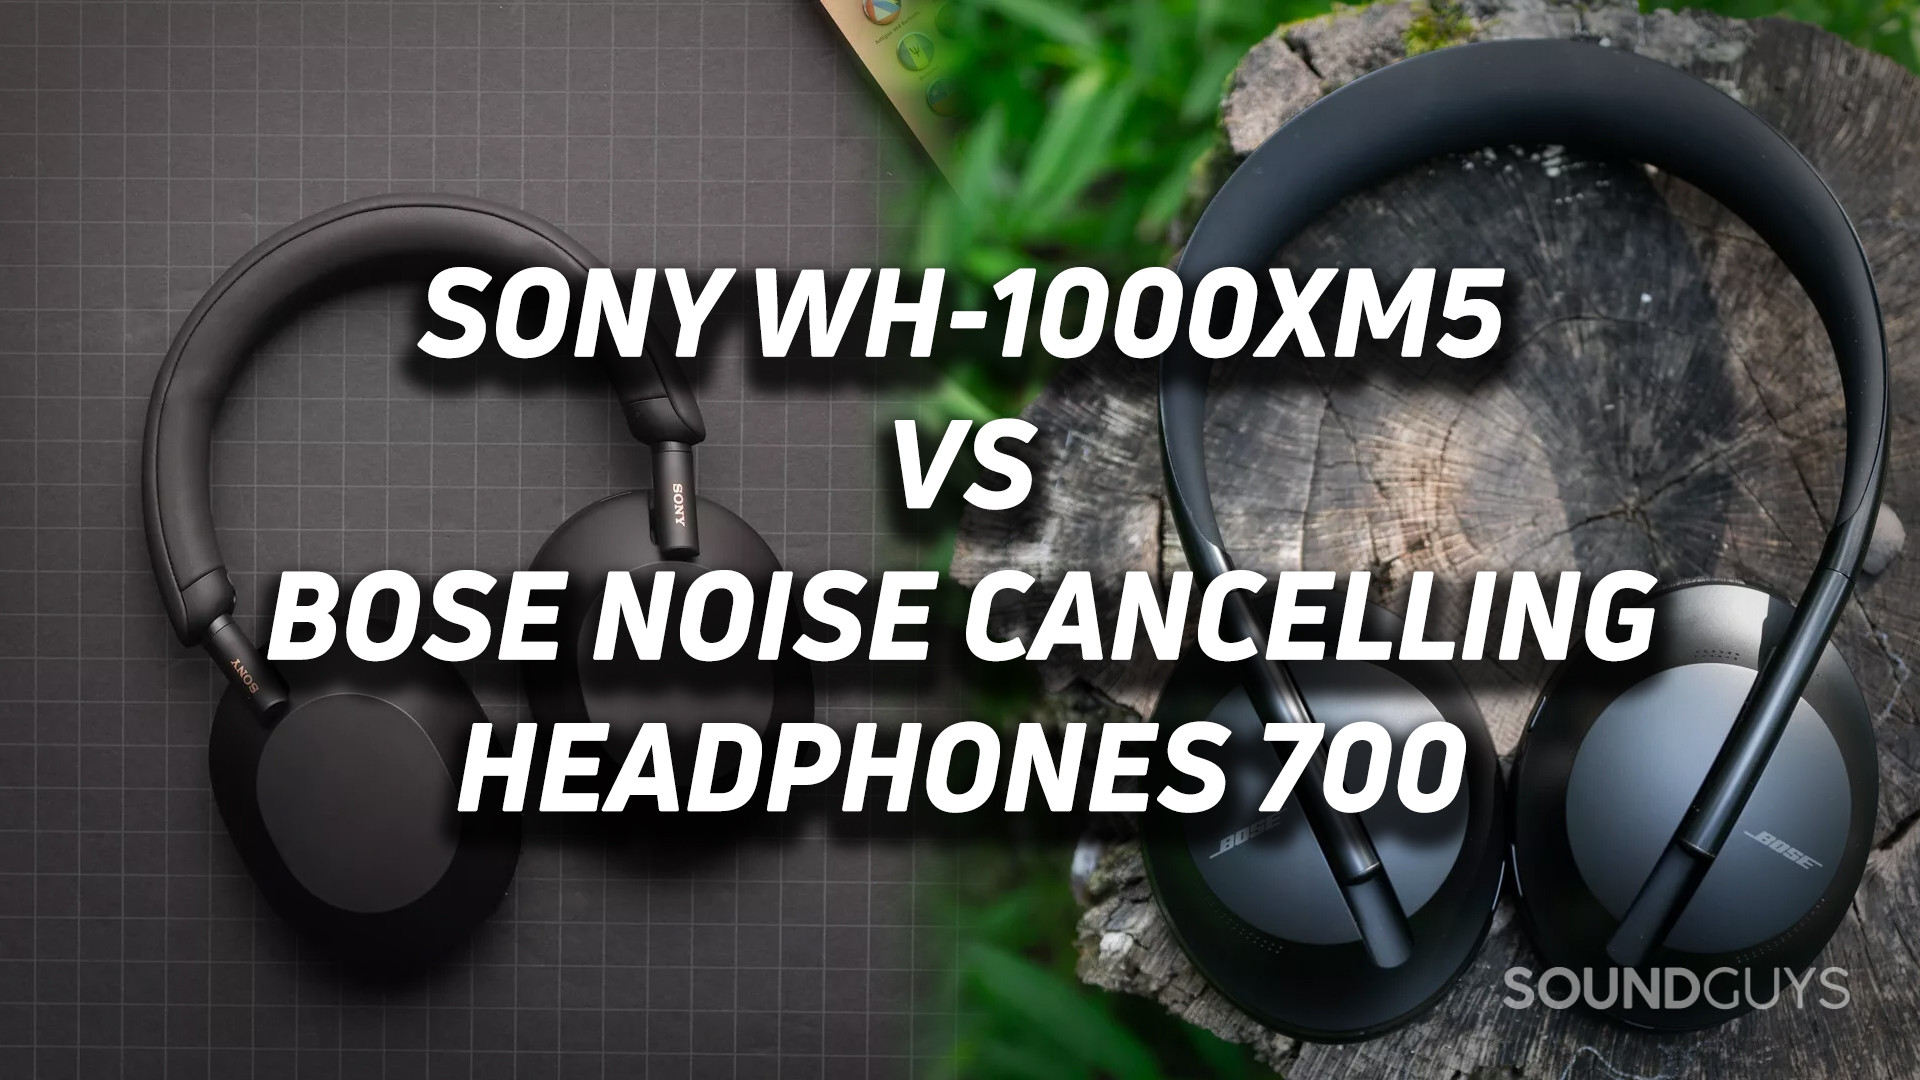 A composite image of two photos placed side by side. The left is of the Sony WH-1000XM5 sitting flat on a desk and the right of the Bose Noise Canceling Headphones 700 sitting flat on a tree stump surrounded by grass. Text superimposed on top of the image reads 'Sony WH-1000XM5 vs Bose Noise Canceling Headphones 700'.